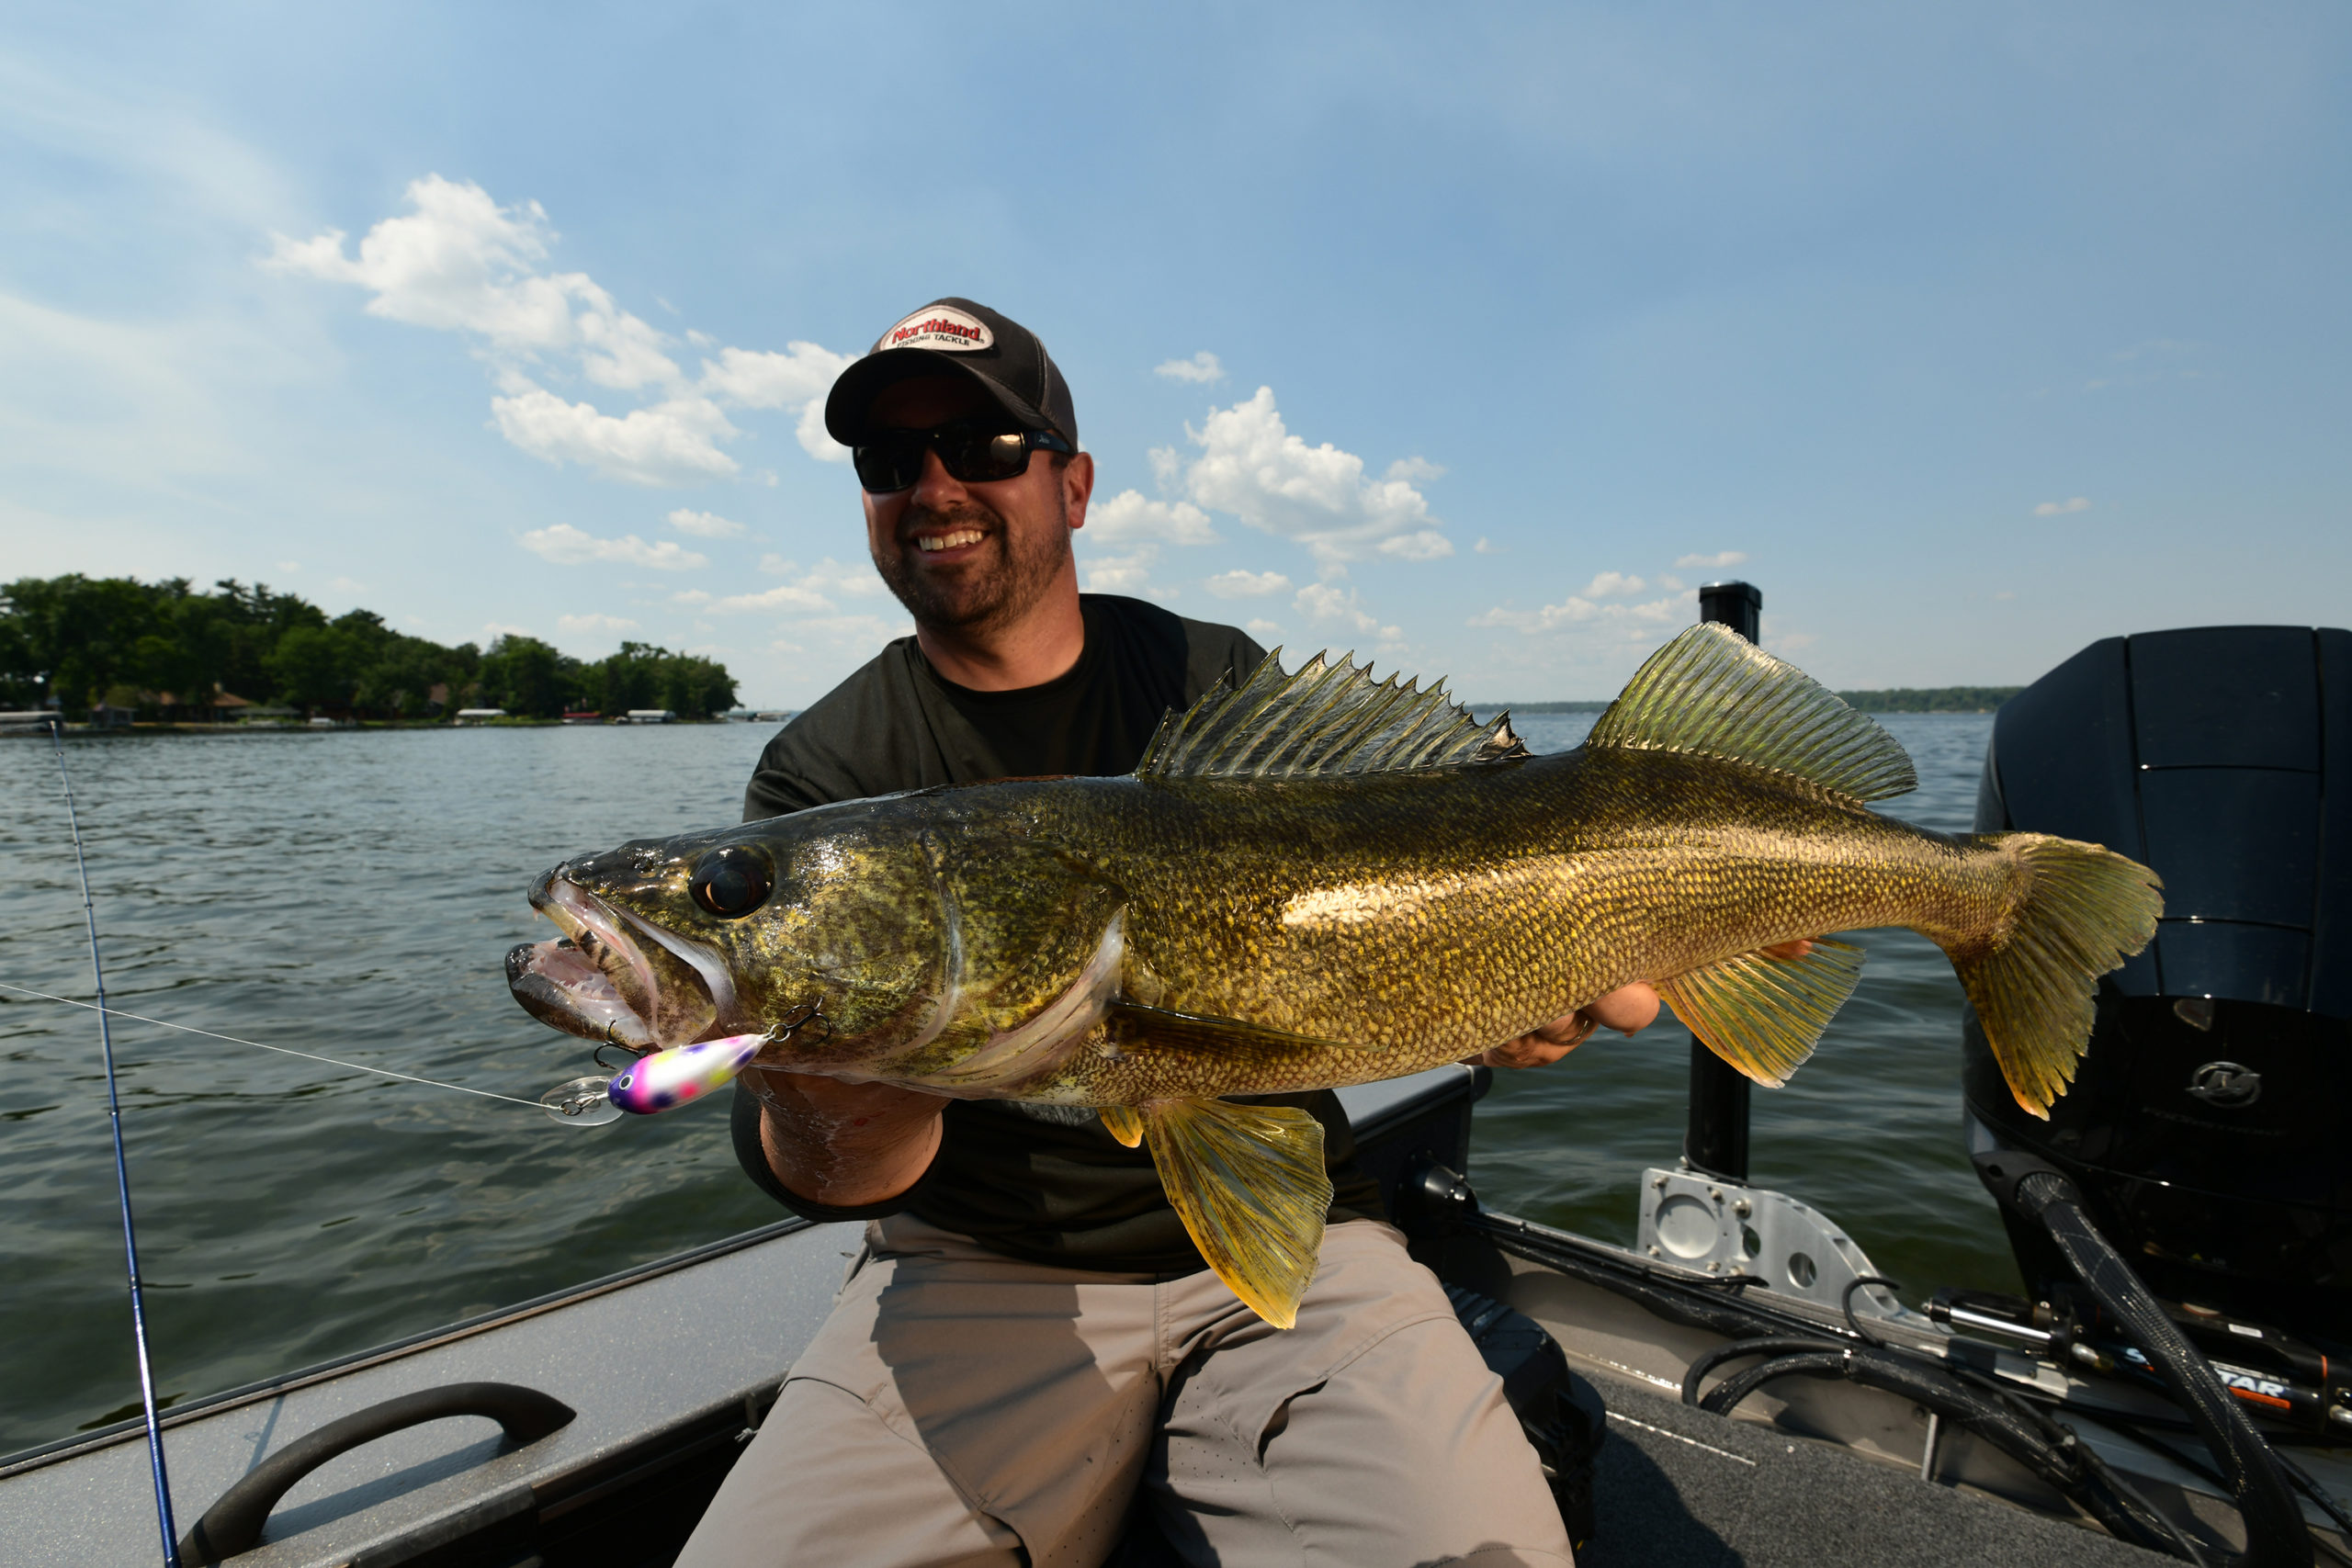 Angler with a big walleye caught on a Rumble Bug crankbait.